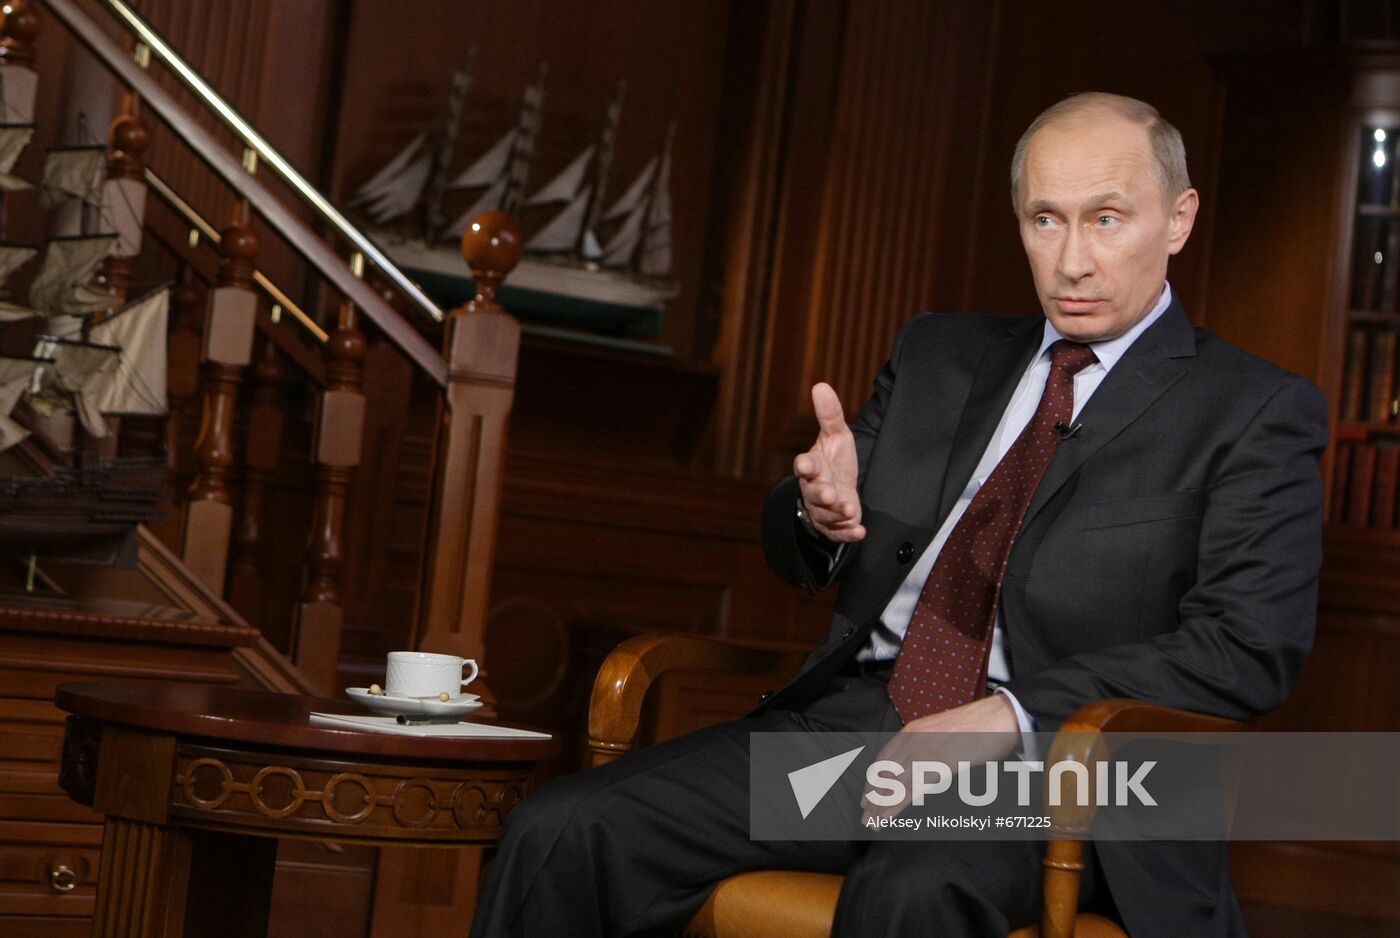 Vladimir Putin gives interview to Mir broadcasting company